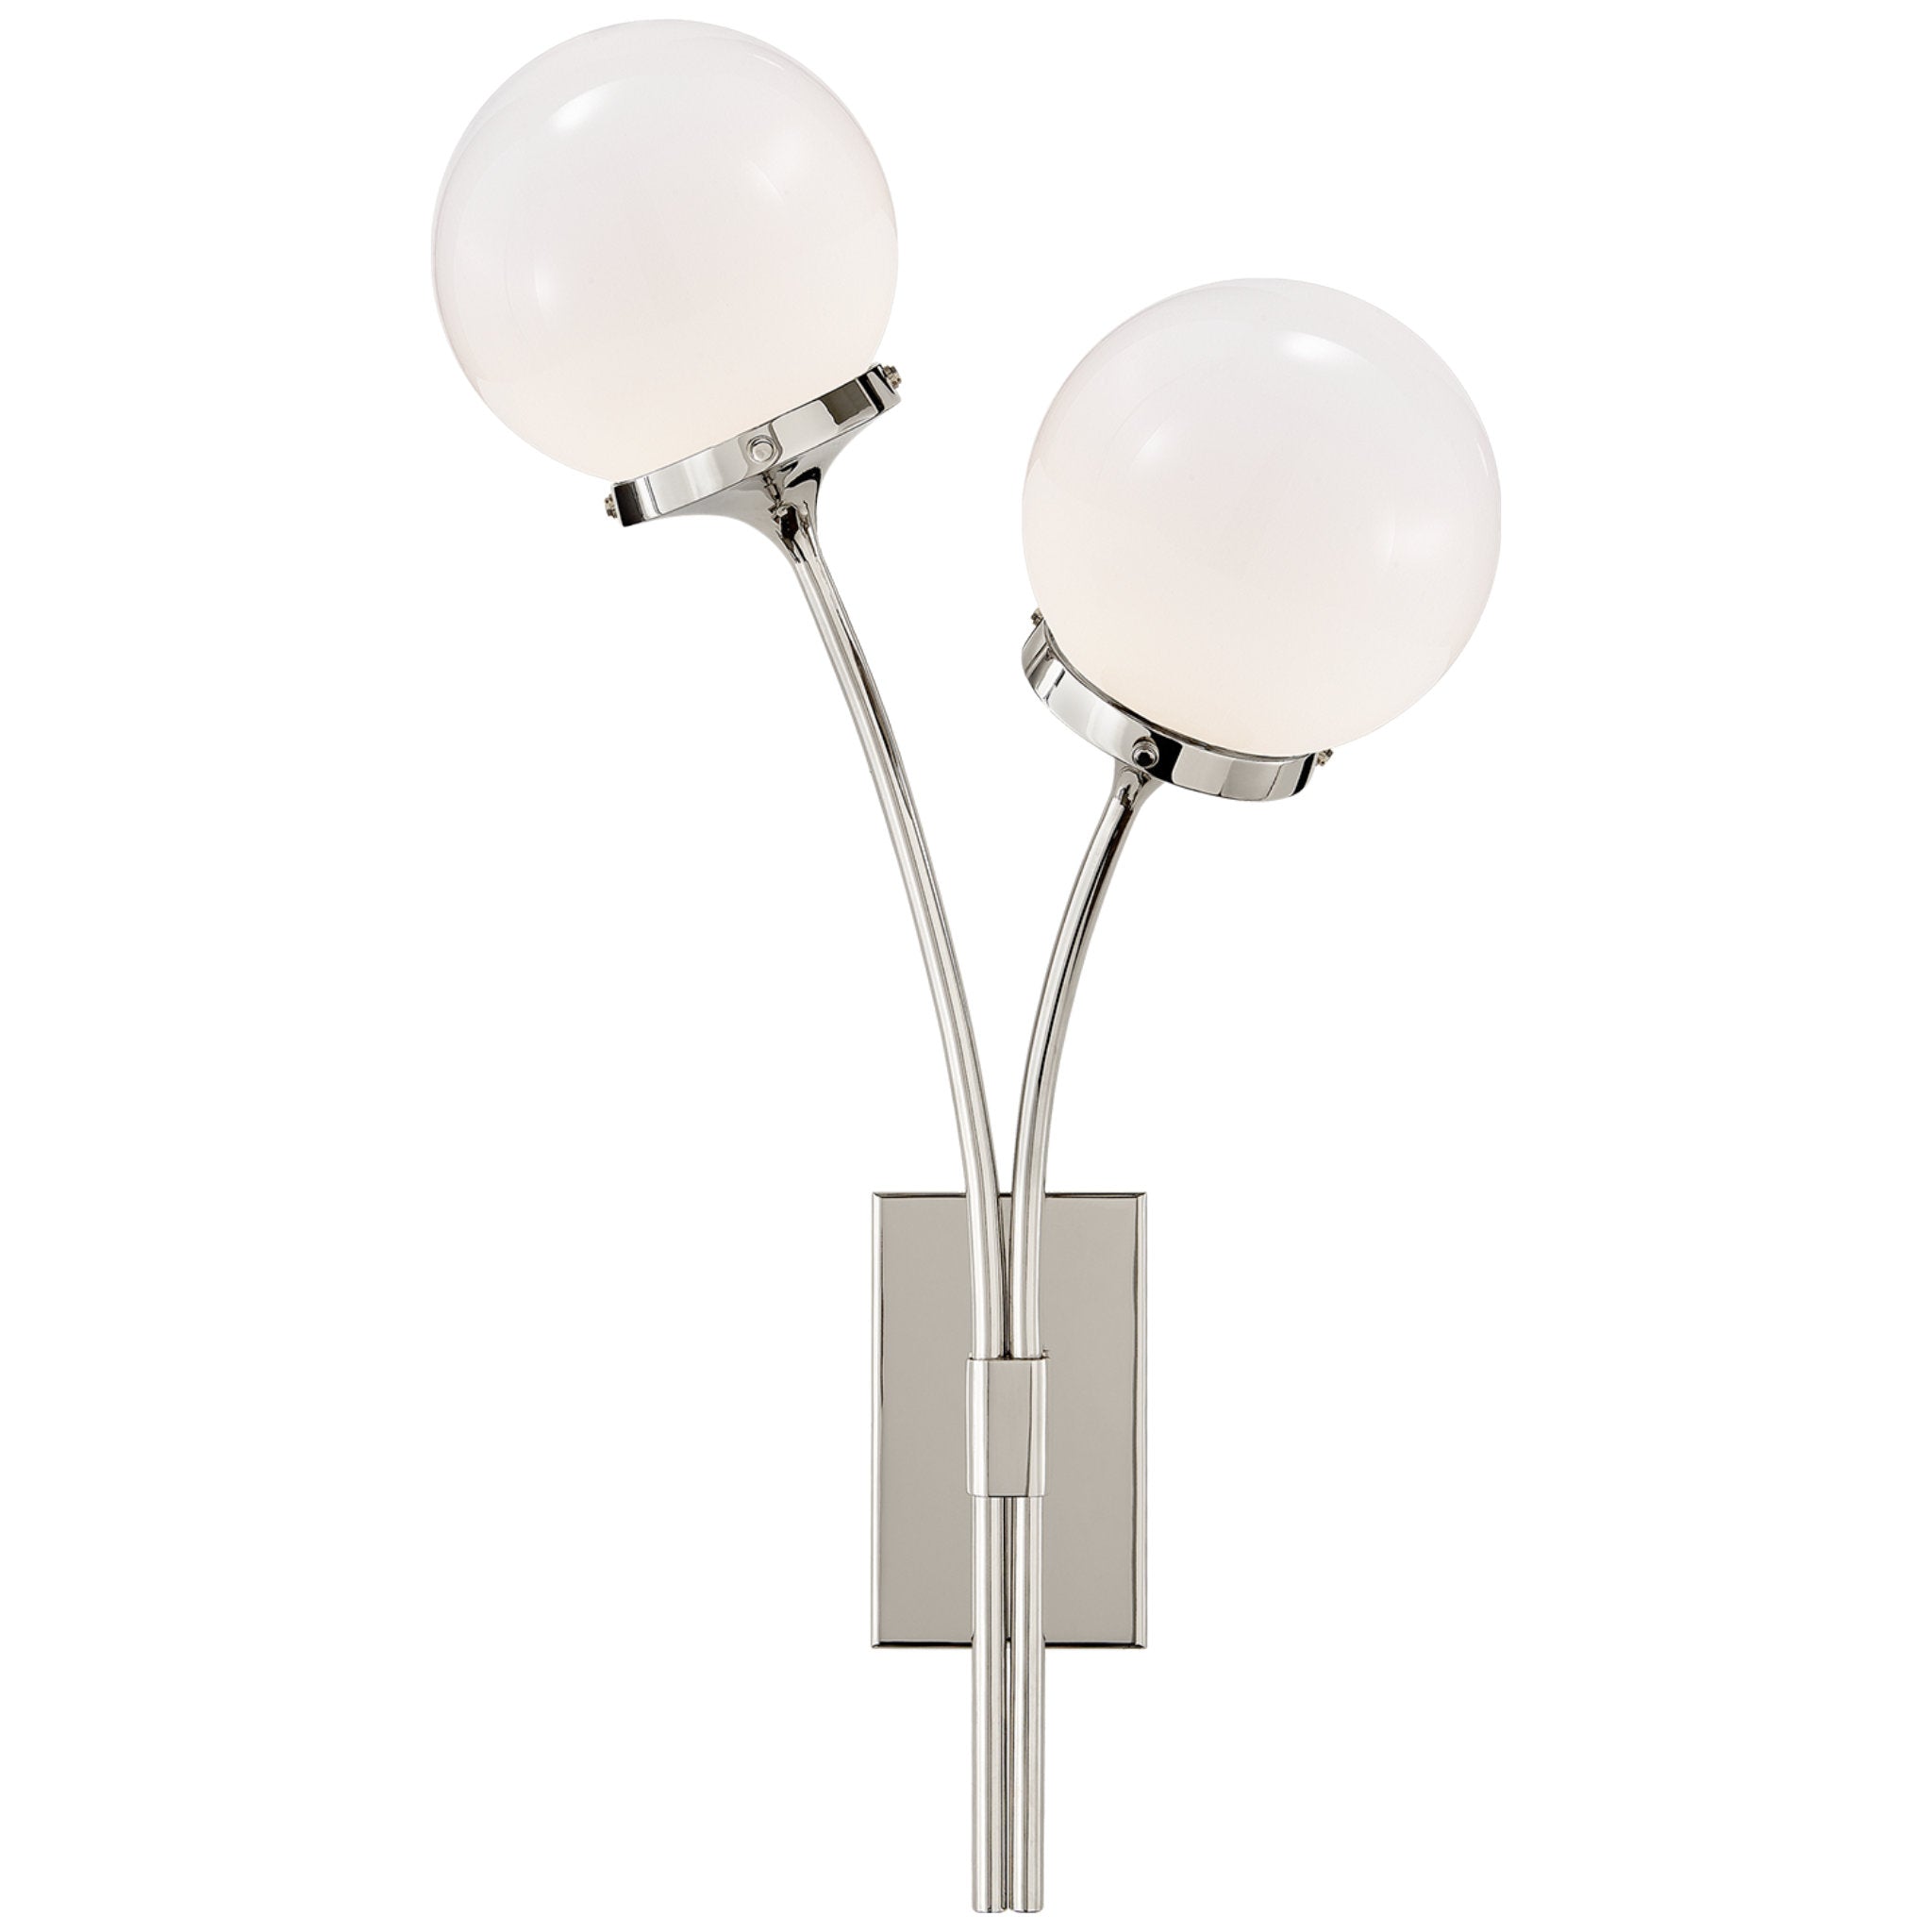 kate spade new york Prescott Right Sconce in Polished Nickel with White Glass